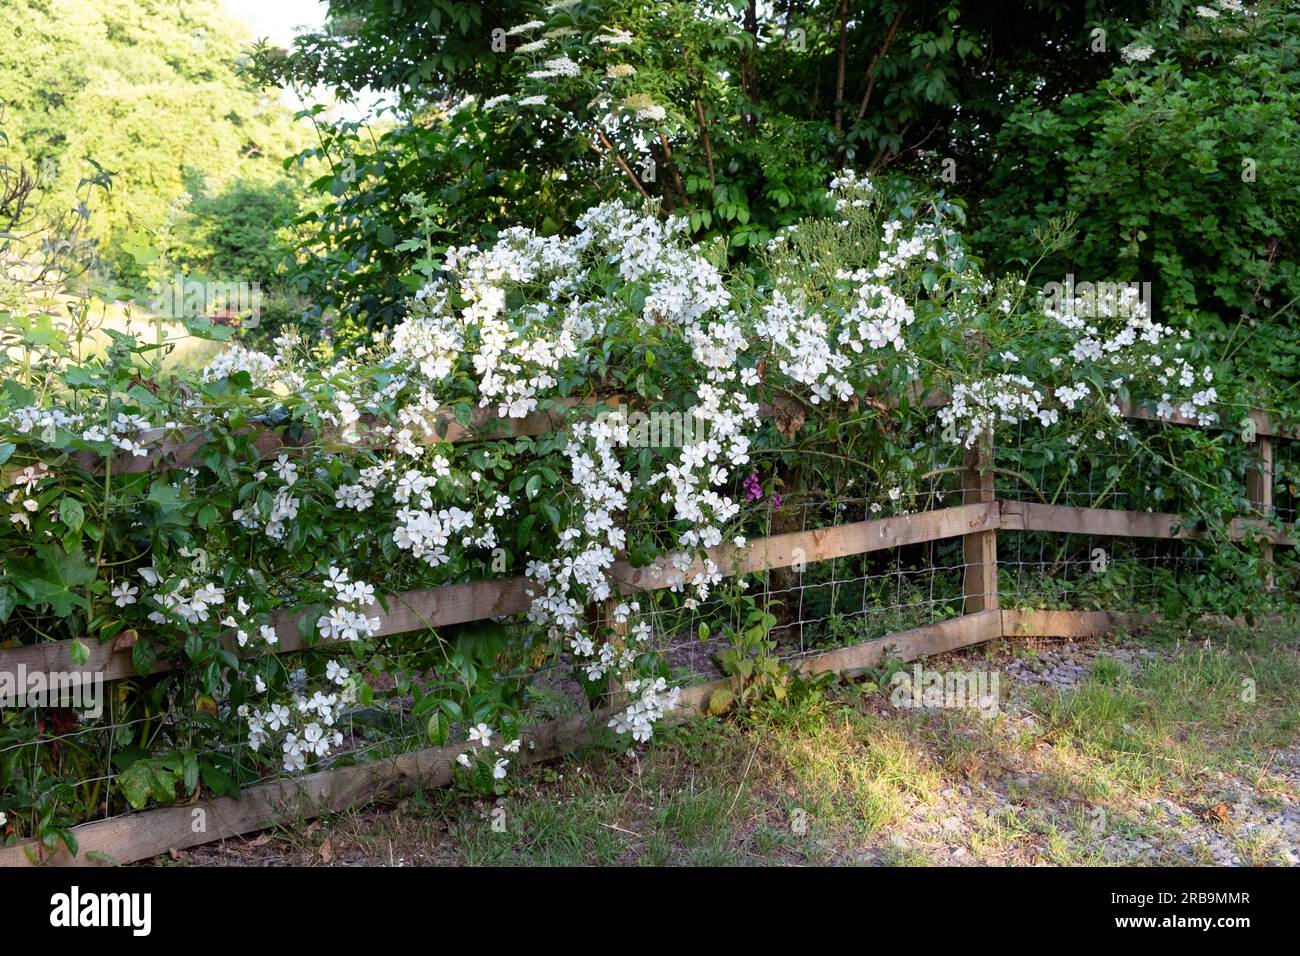 Kiftsgate rose with small white flowers in bloom growing along and supported by a wooden fence in country garden Carmarthenshire Wales UK KATHY DEWITT Stock Photo